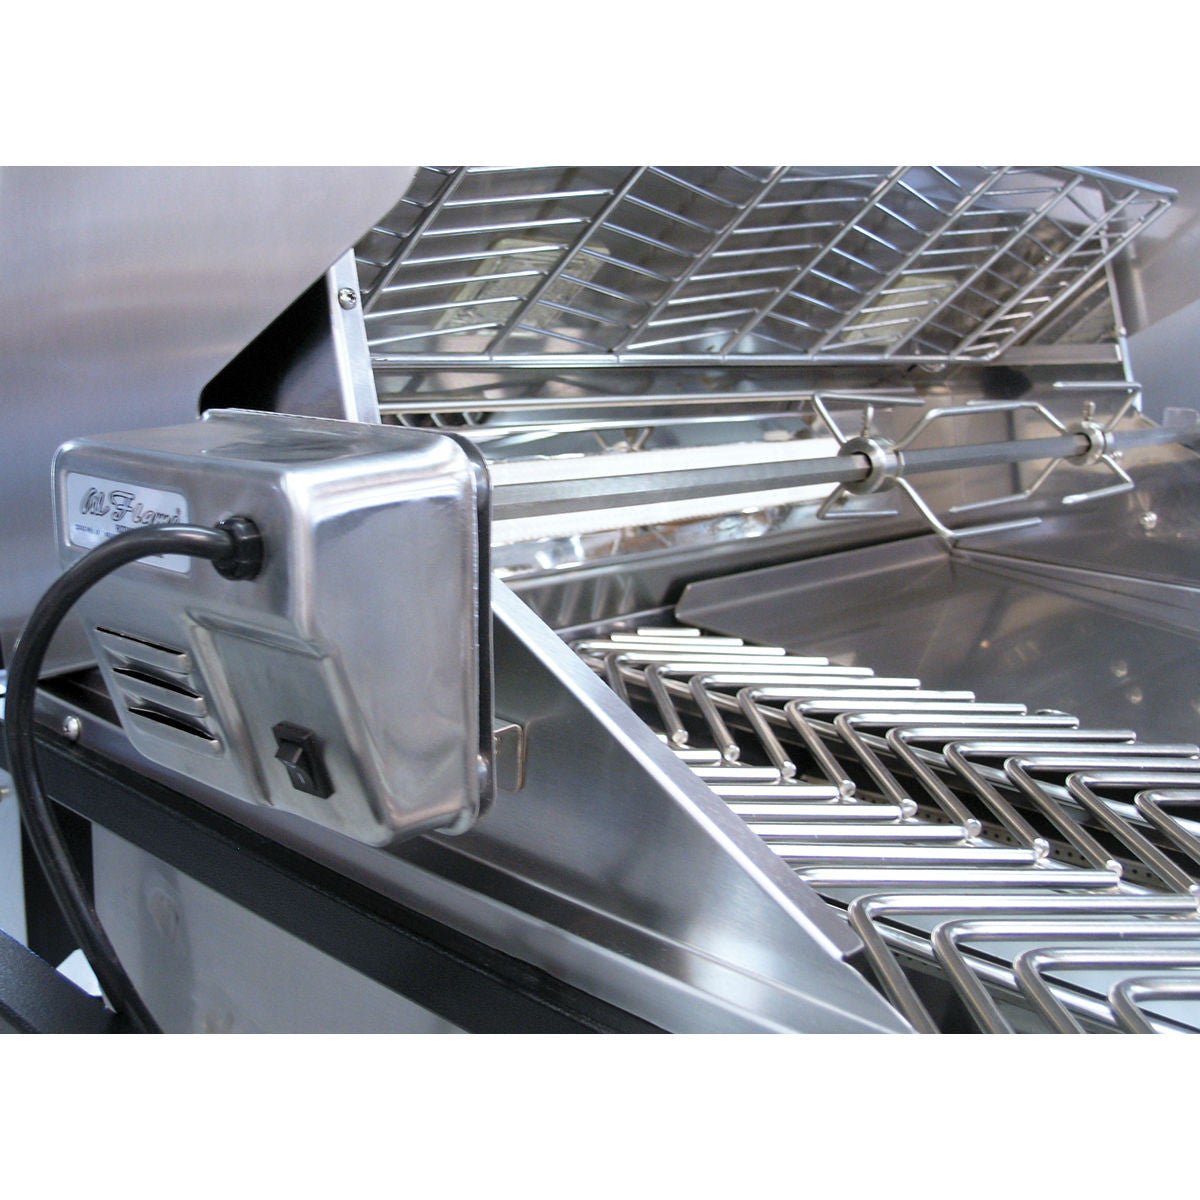 Cal FlameCal Flame P4 32 Inch 4 Burner Built-In Grill with Rotisserie, Griddle BBQ19P04 BBQ19P04- BetterPatio.com